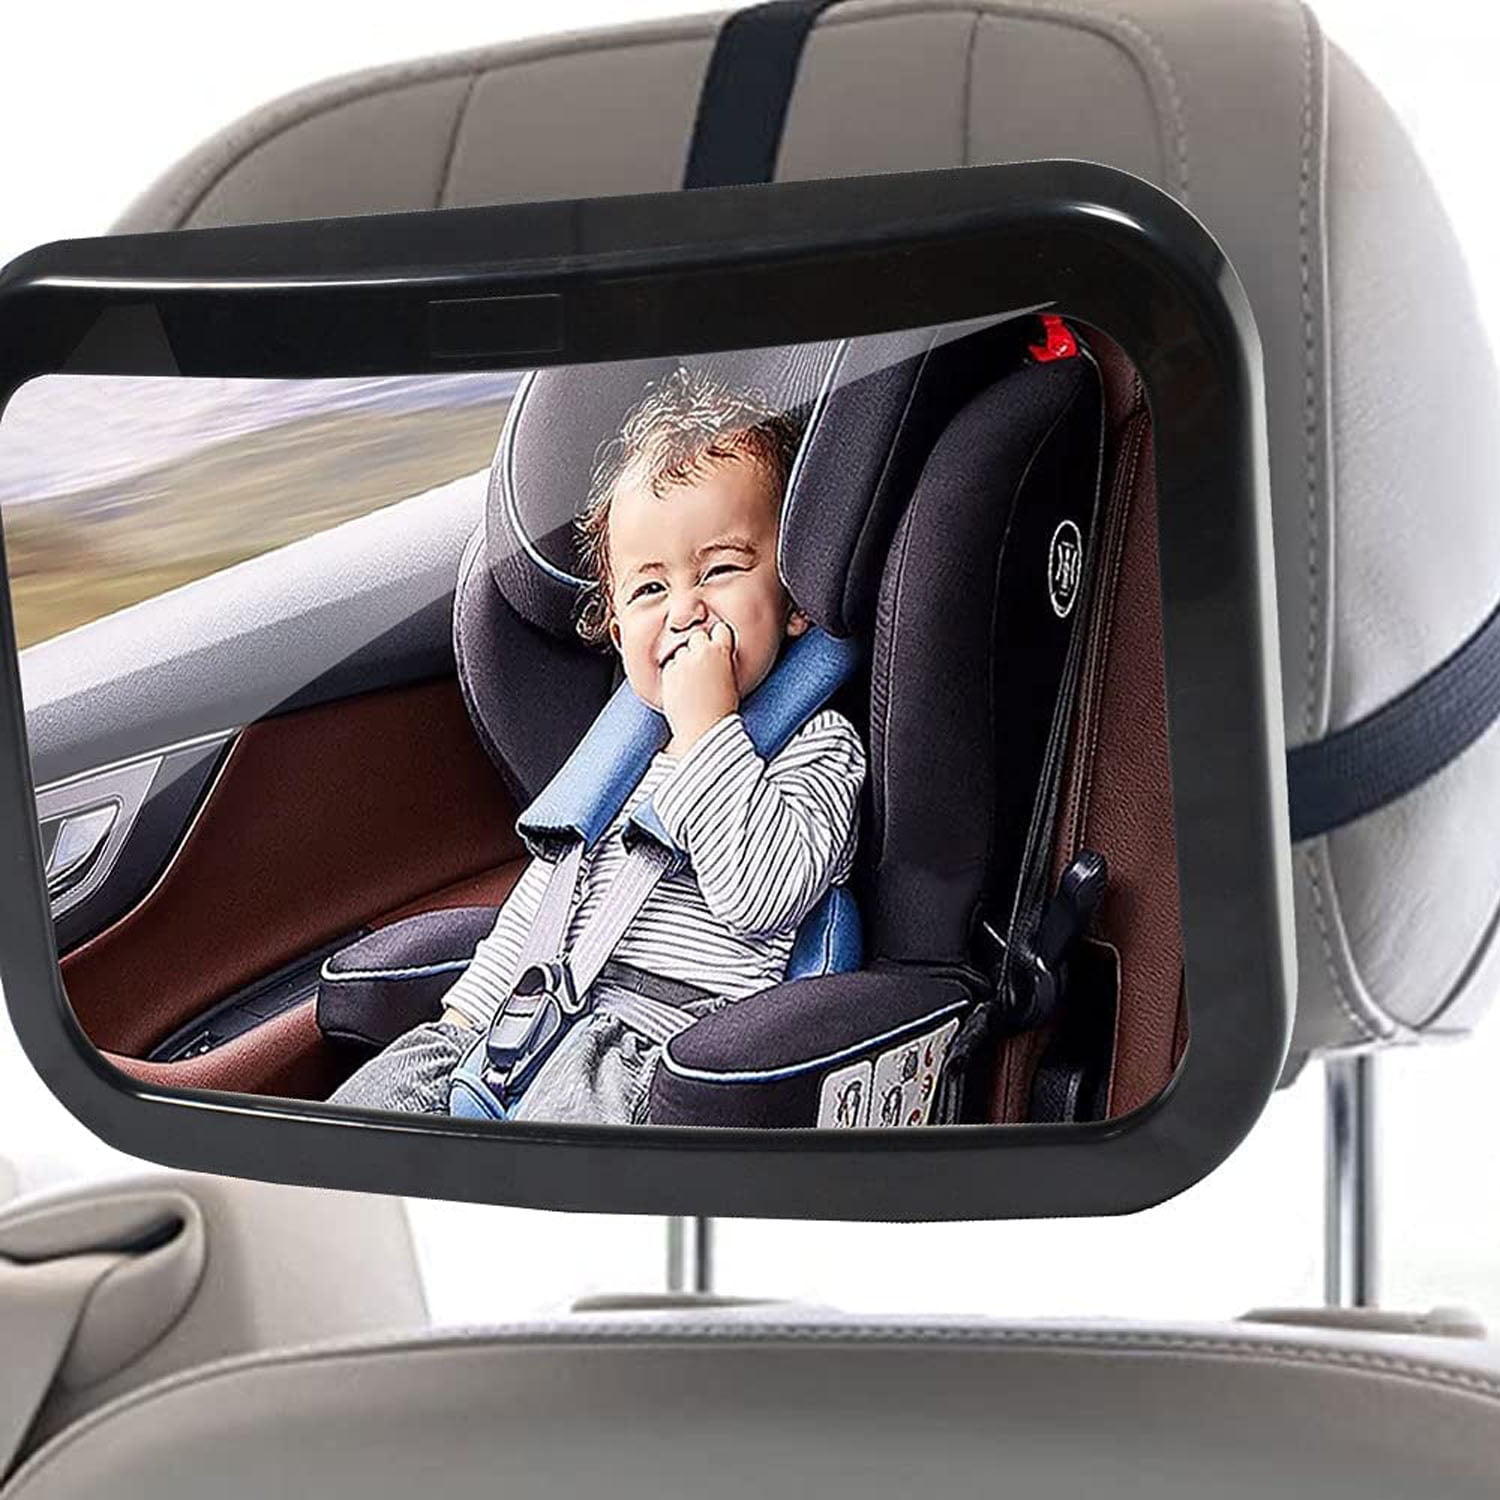 Andalus Backseat Mirror Suction Rear View Small Dream Baby Back Seat Facing 